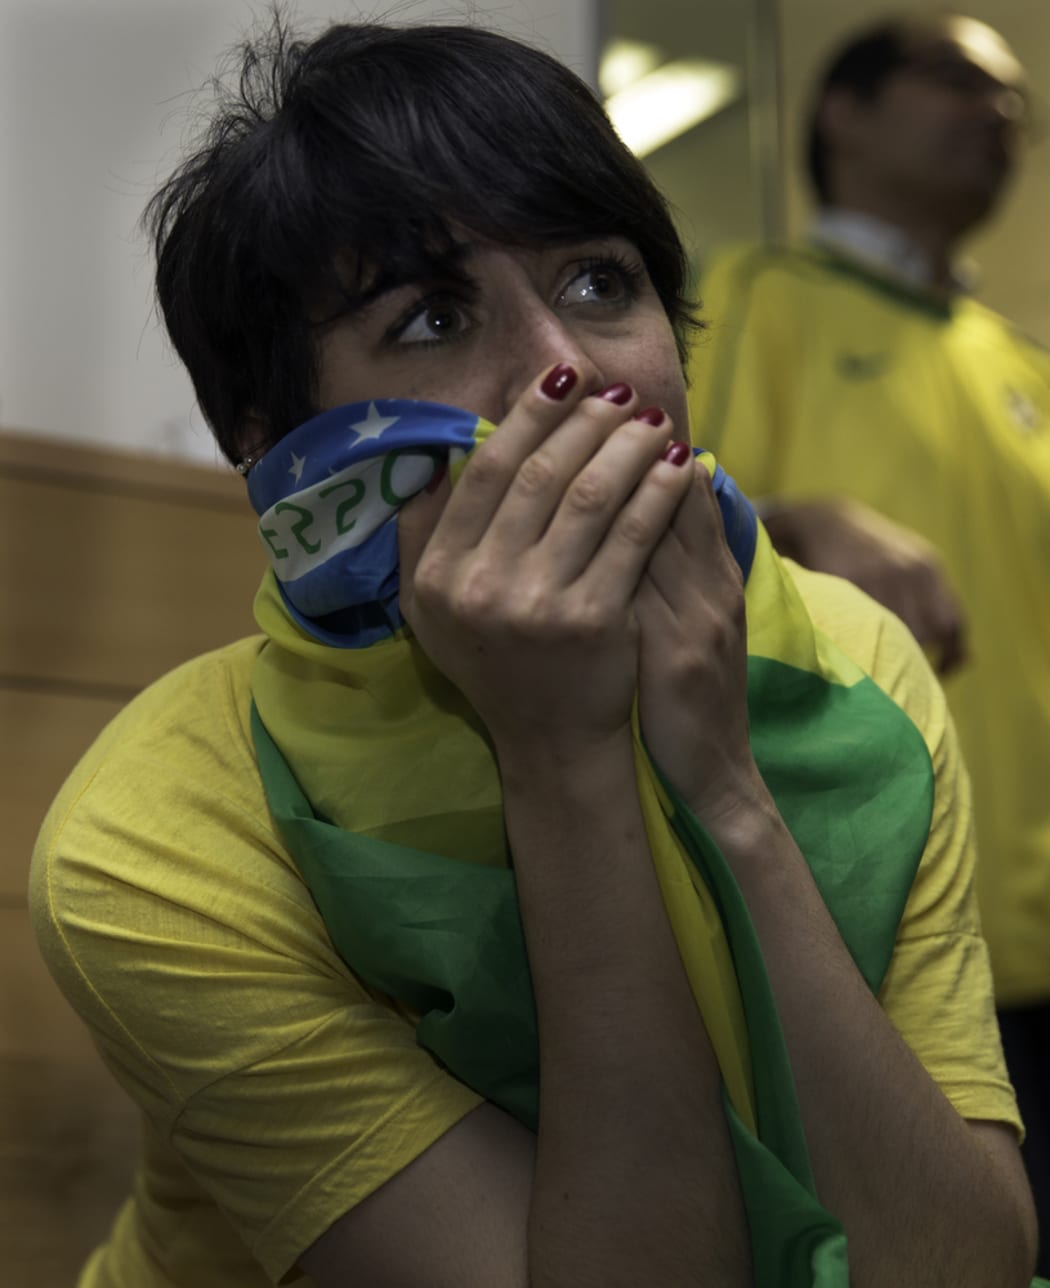 A Brazil fan reacts to the team's 7-1 defeat to Germany in 2014.